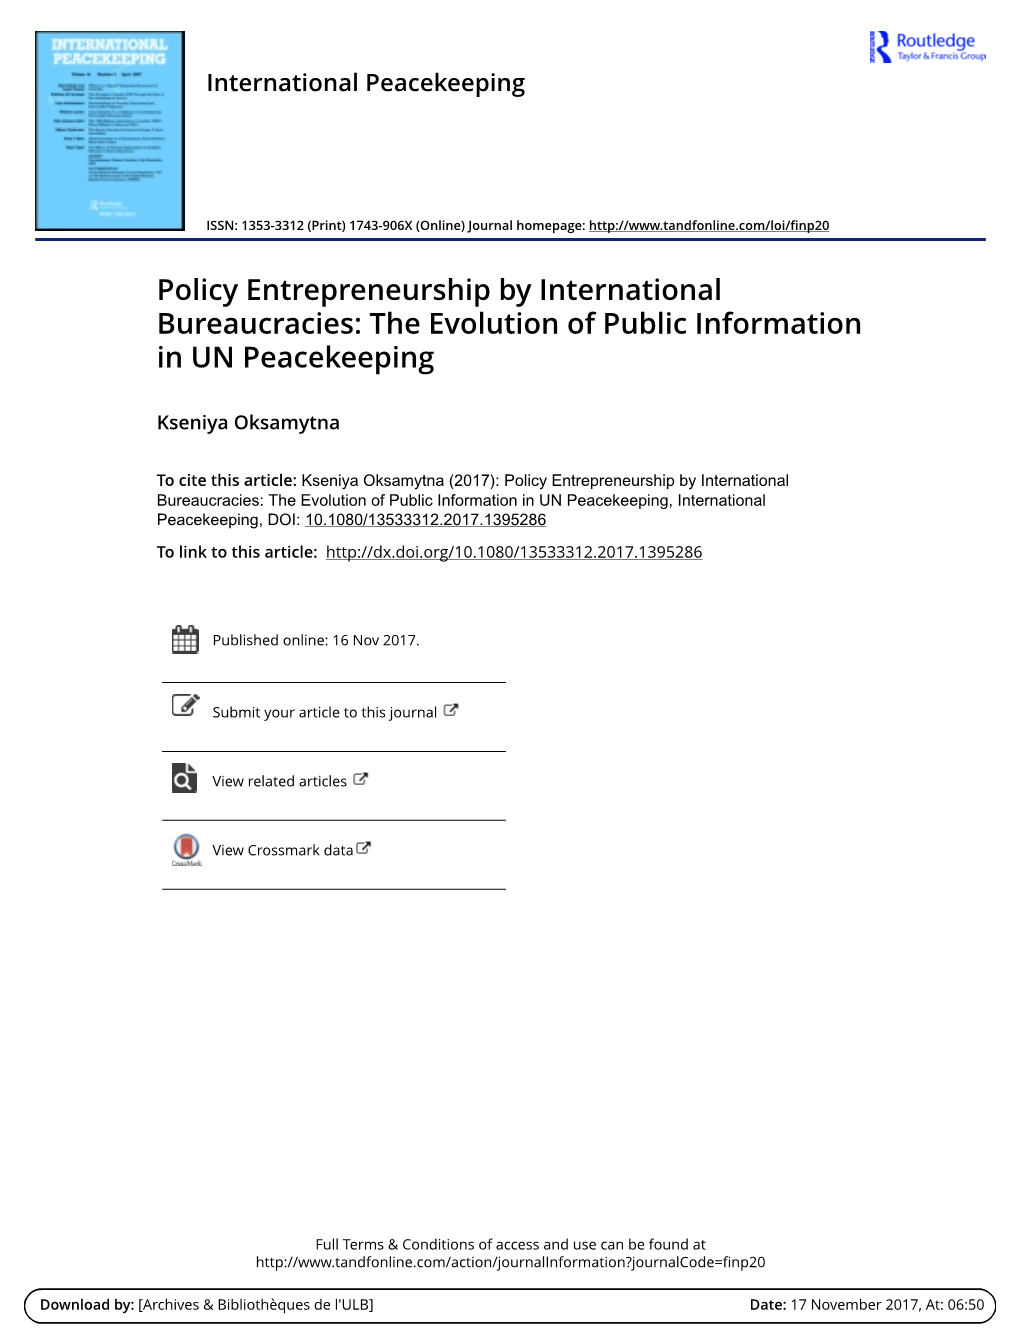 Policy Entrepreneurship by International Bureaucracies: the Evolution of Public Information in UN Peacekeeping